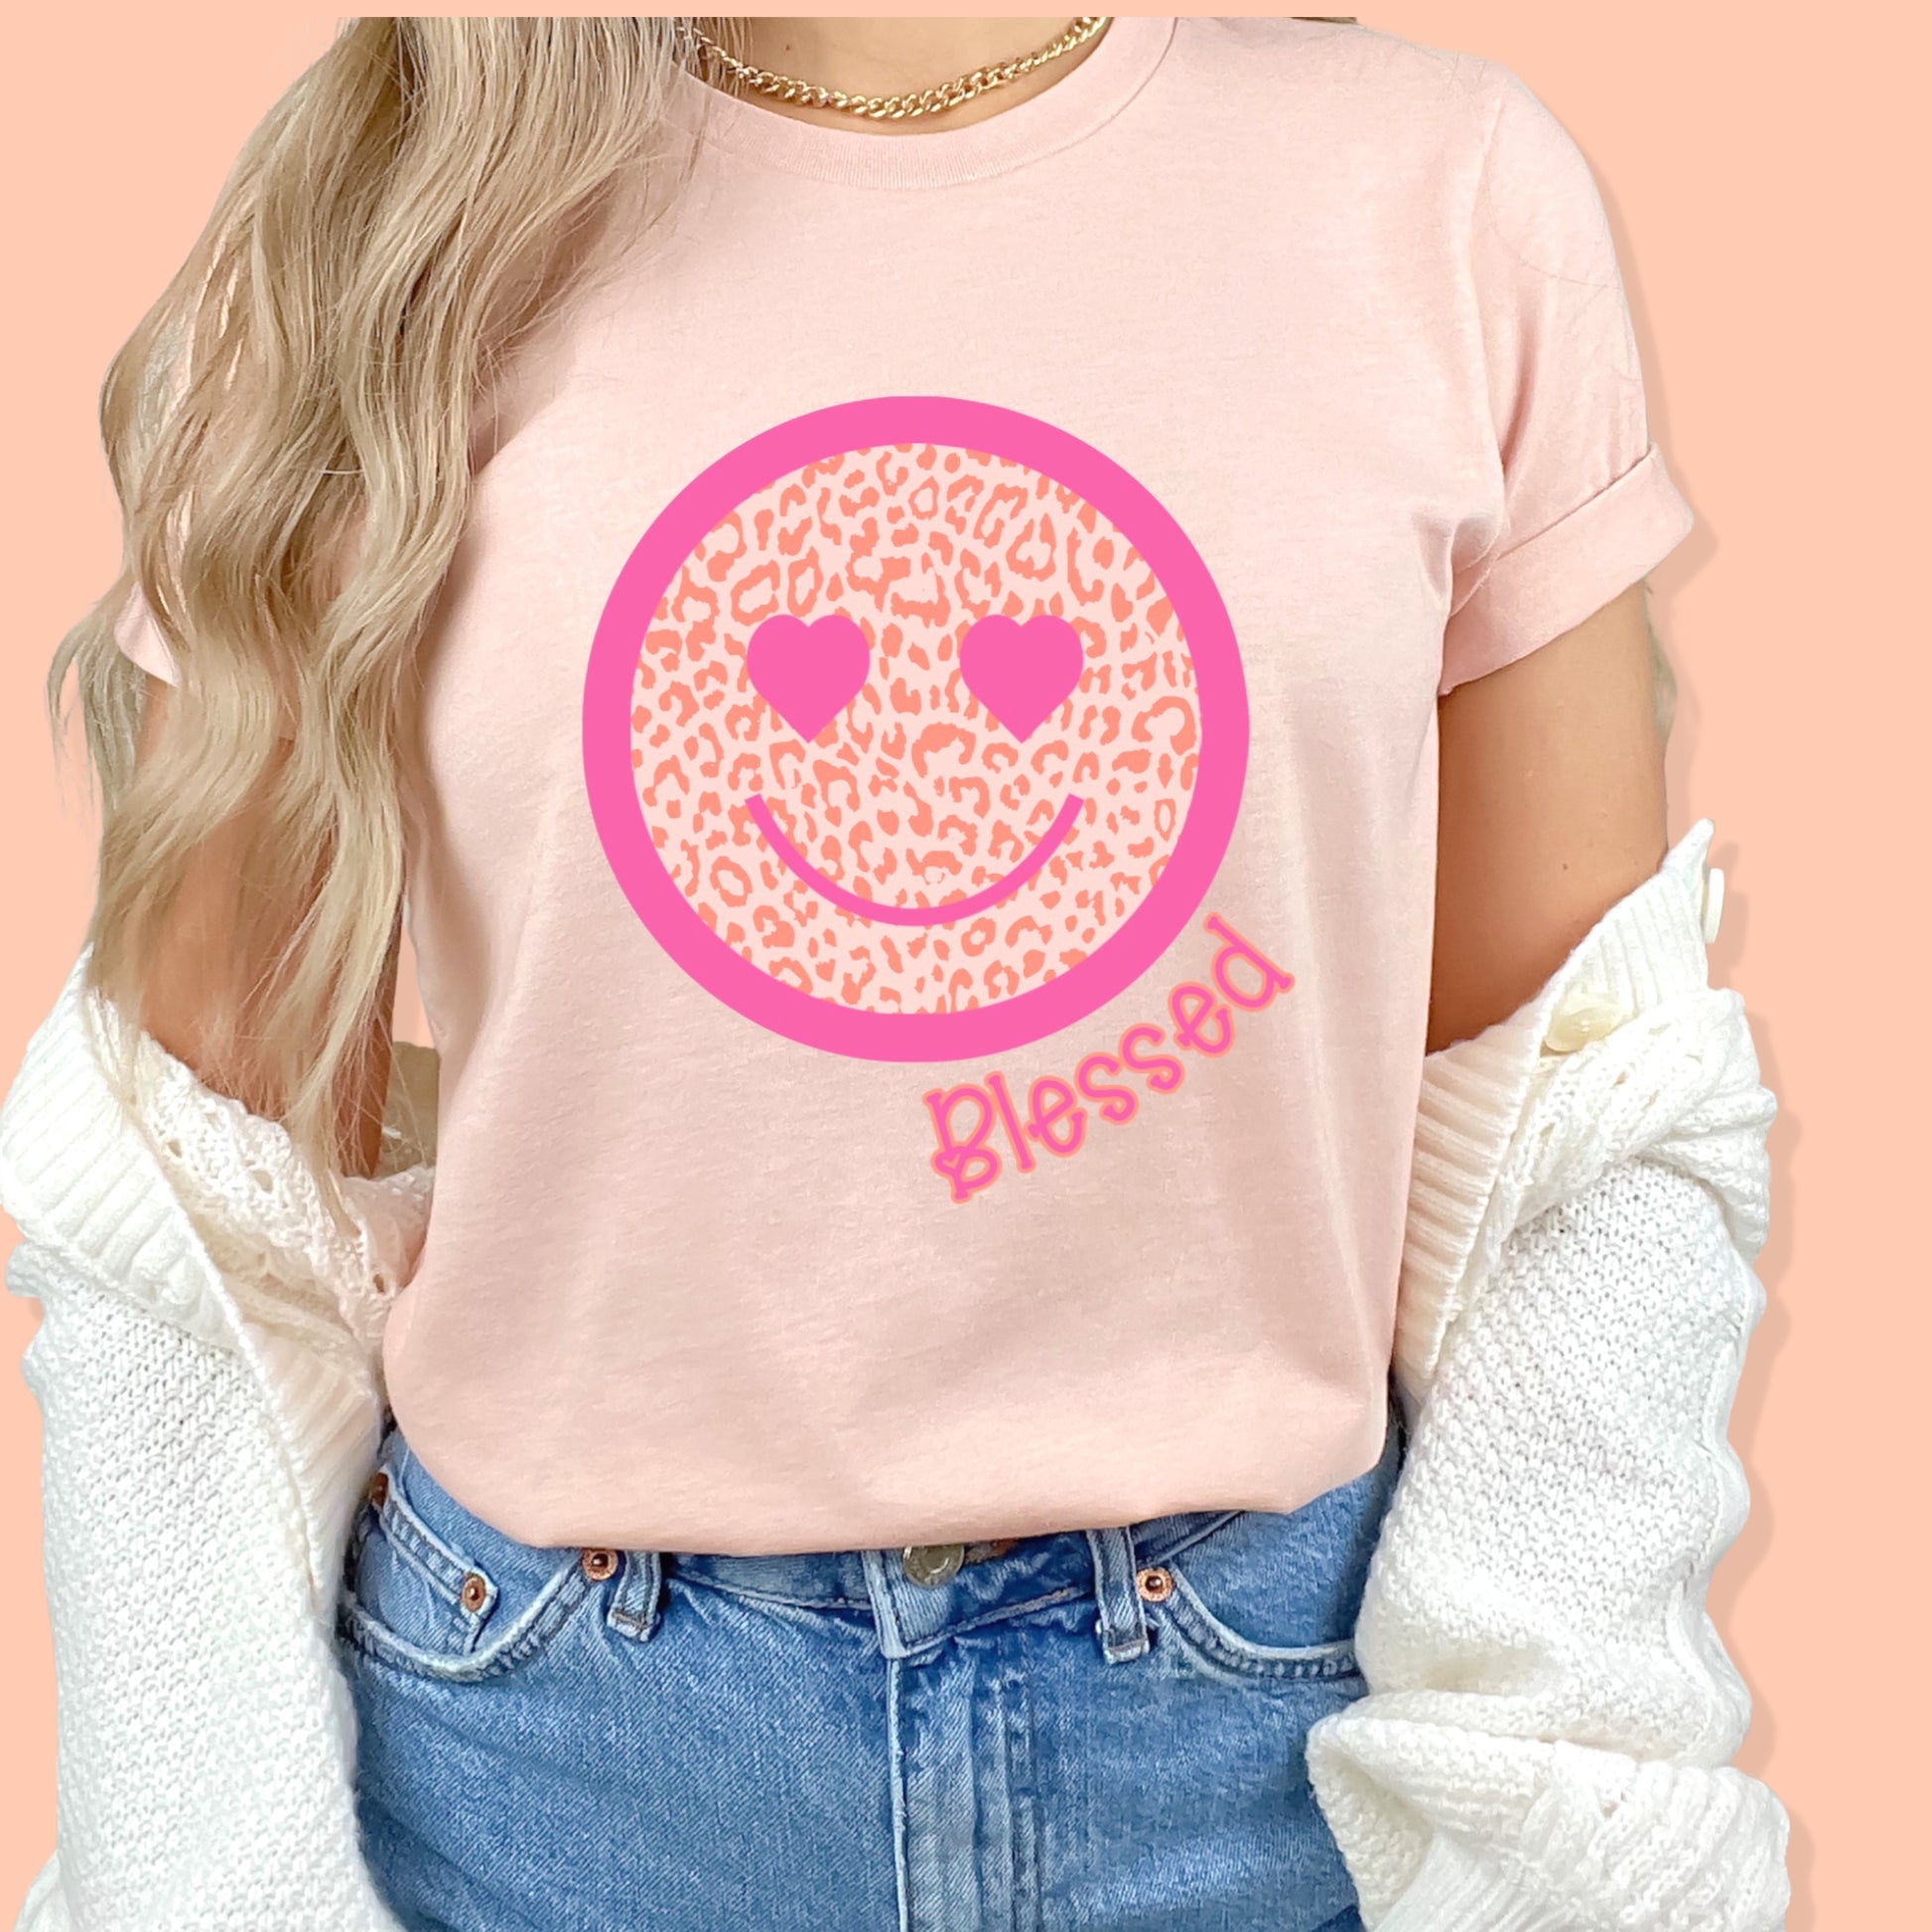 Peach colored smiley face with a pink border and heart eyes, as well as the word "blessed"